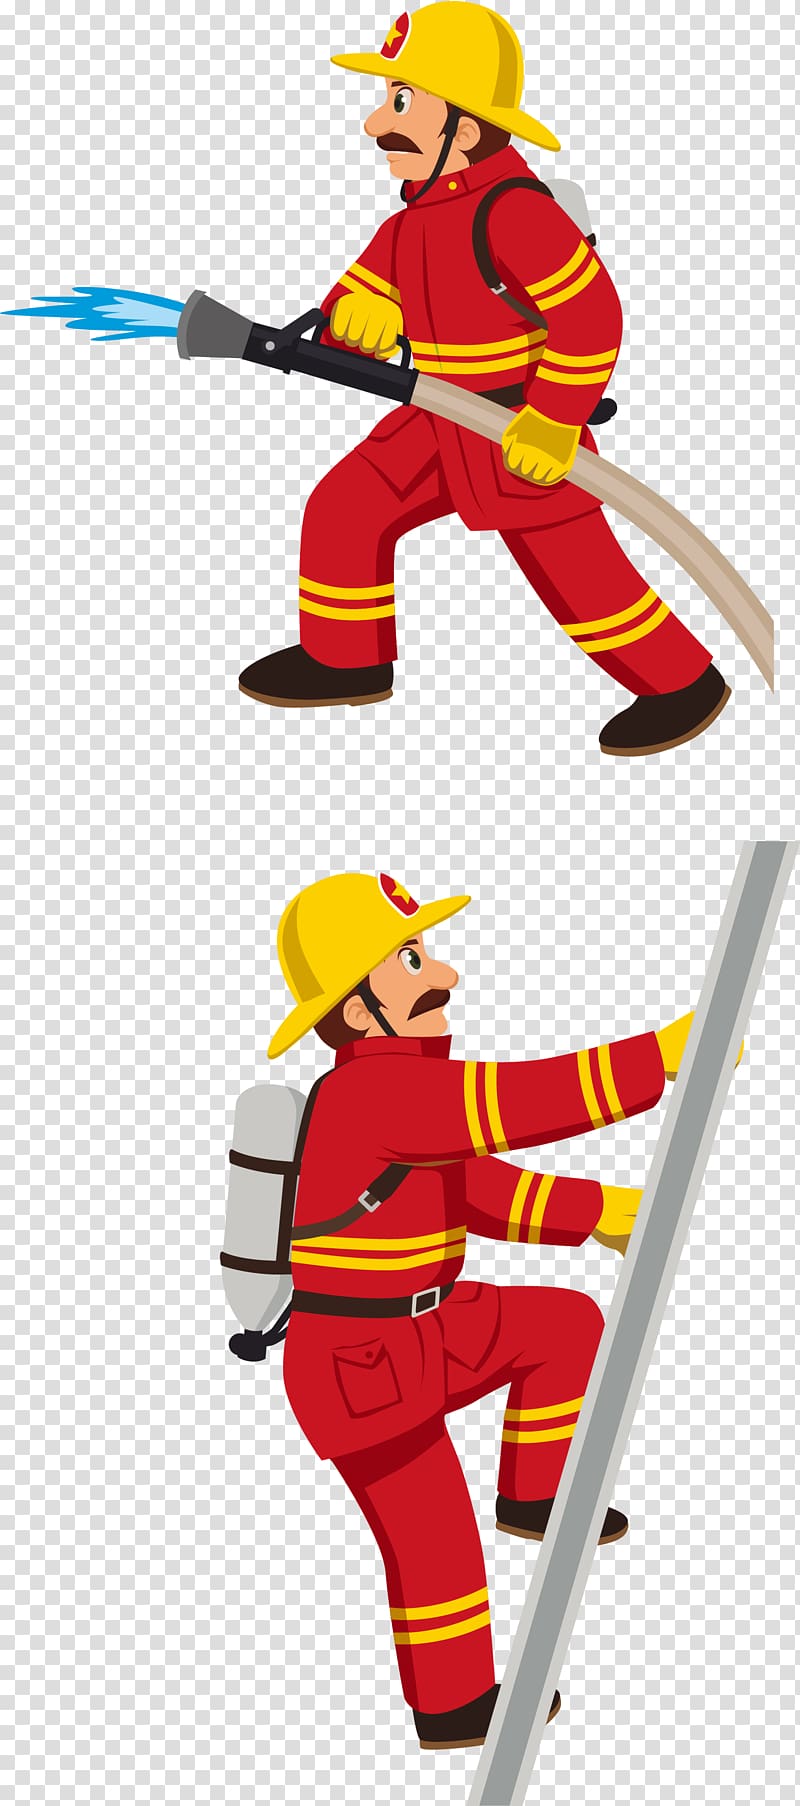 Firefighter holding house and climbing on ladder illustration.